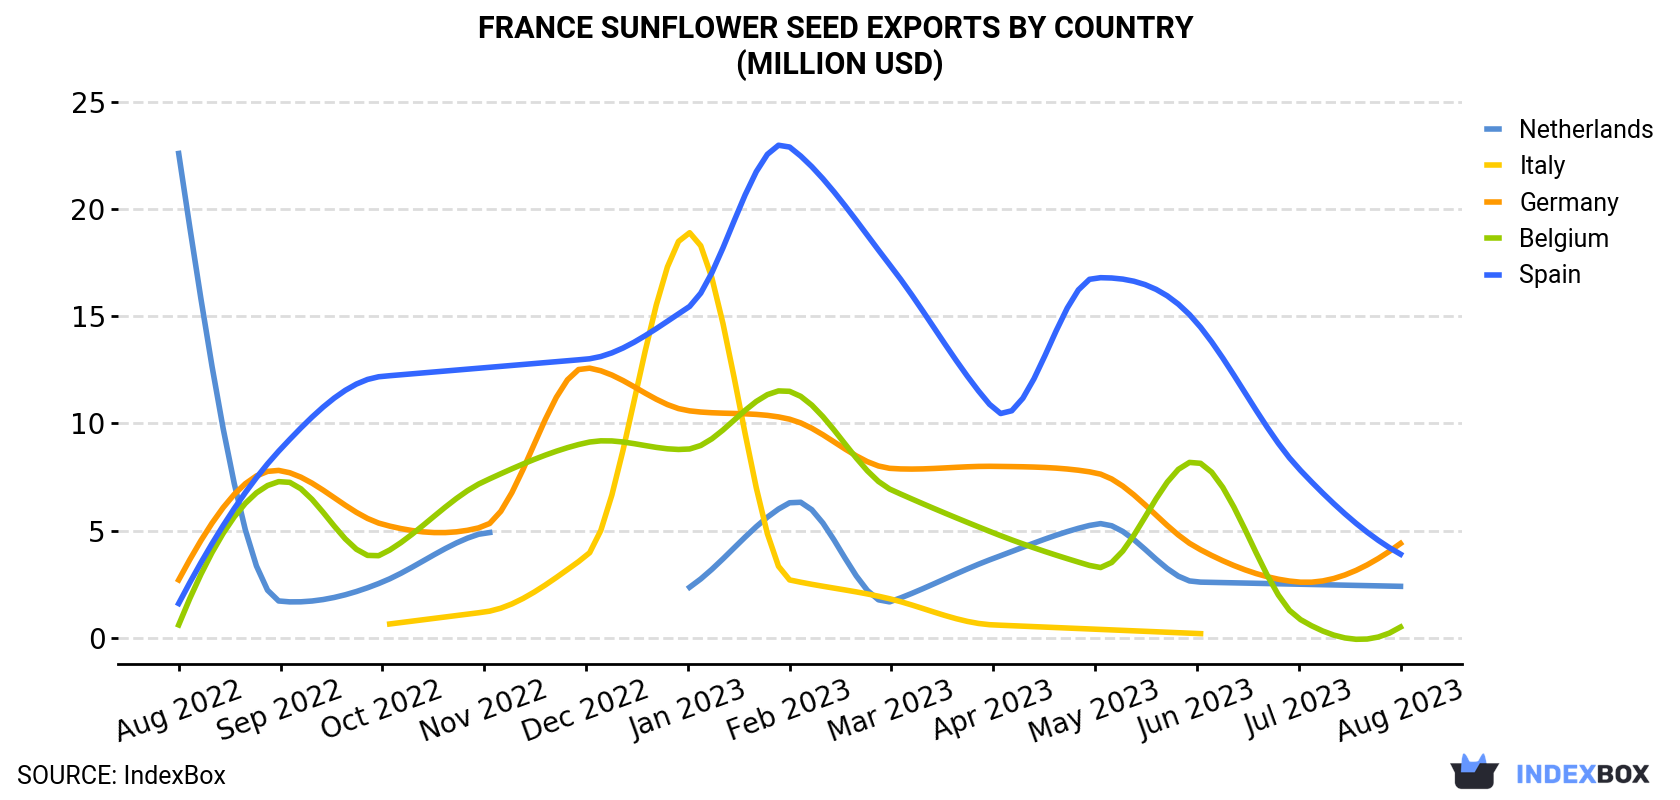 France Sunflower Seed Exports By Country (Million USD)